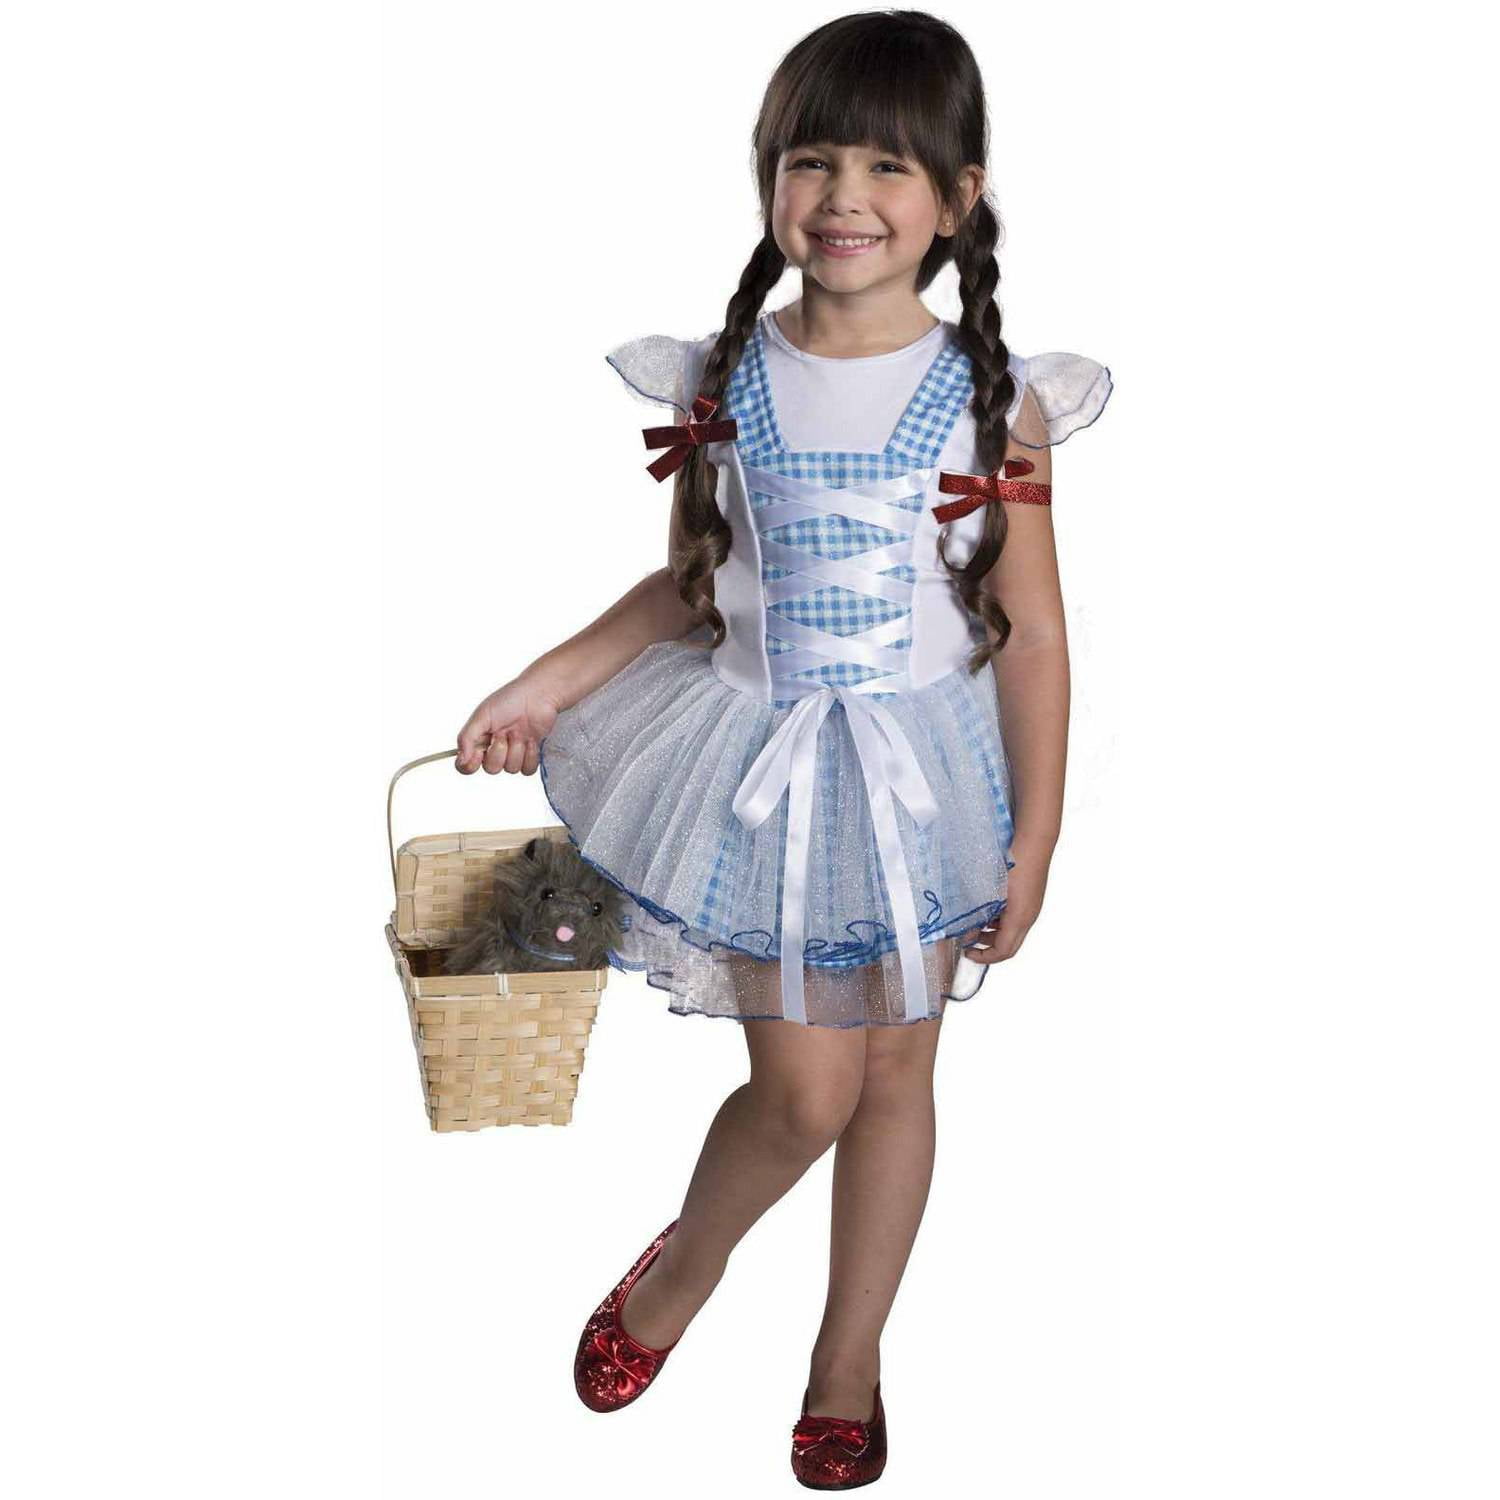 Halloween Costume Wizard of Oz Costume Photo Prop Silver Tutu Dress Birthday Party Outfit Toddler Costume